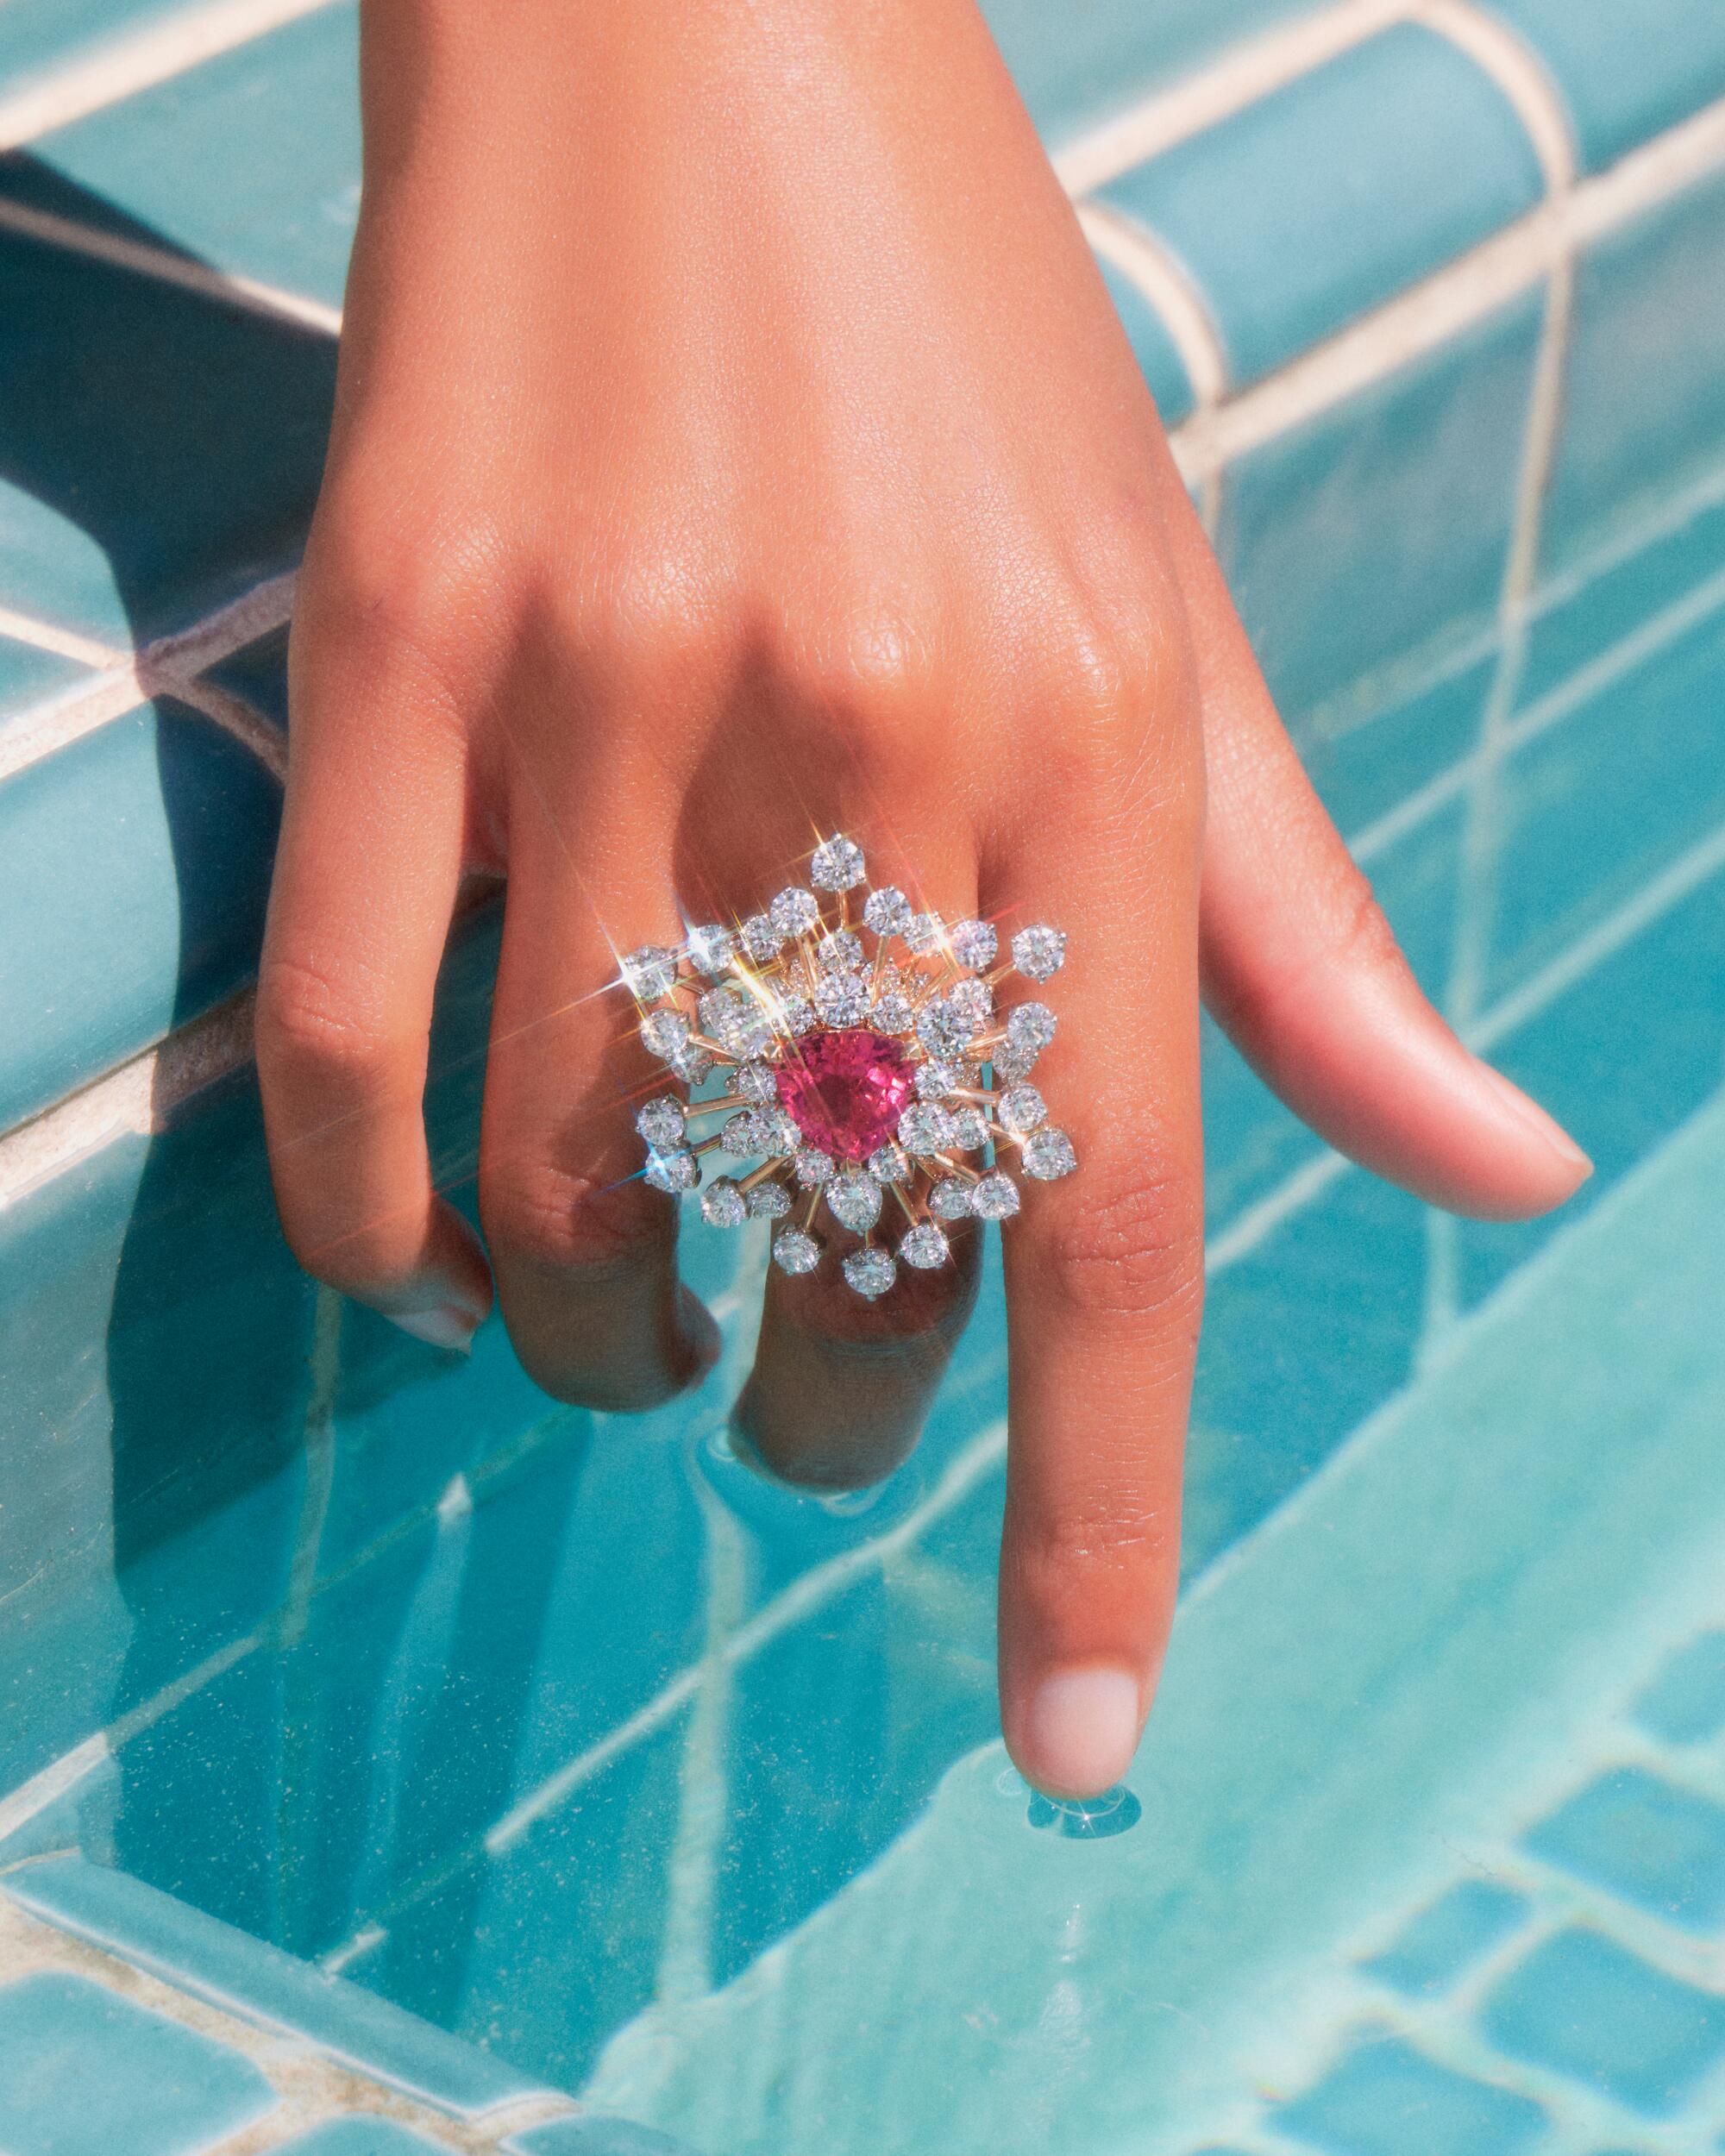  An 18 karat yellow gold with a red spinel of over 5 carats and diamonds shown on a hand grazing water by the pool.